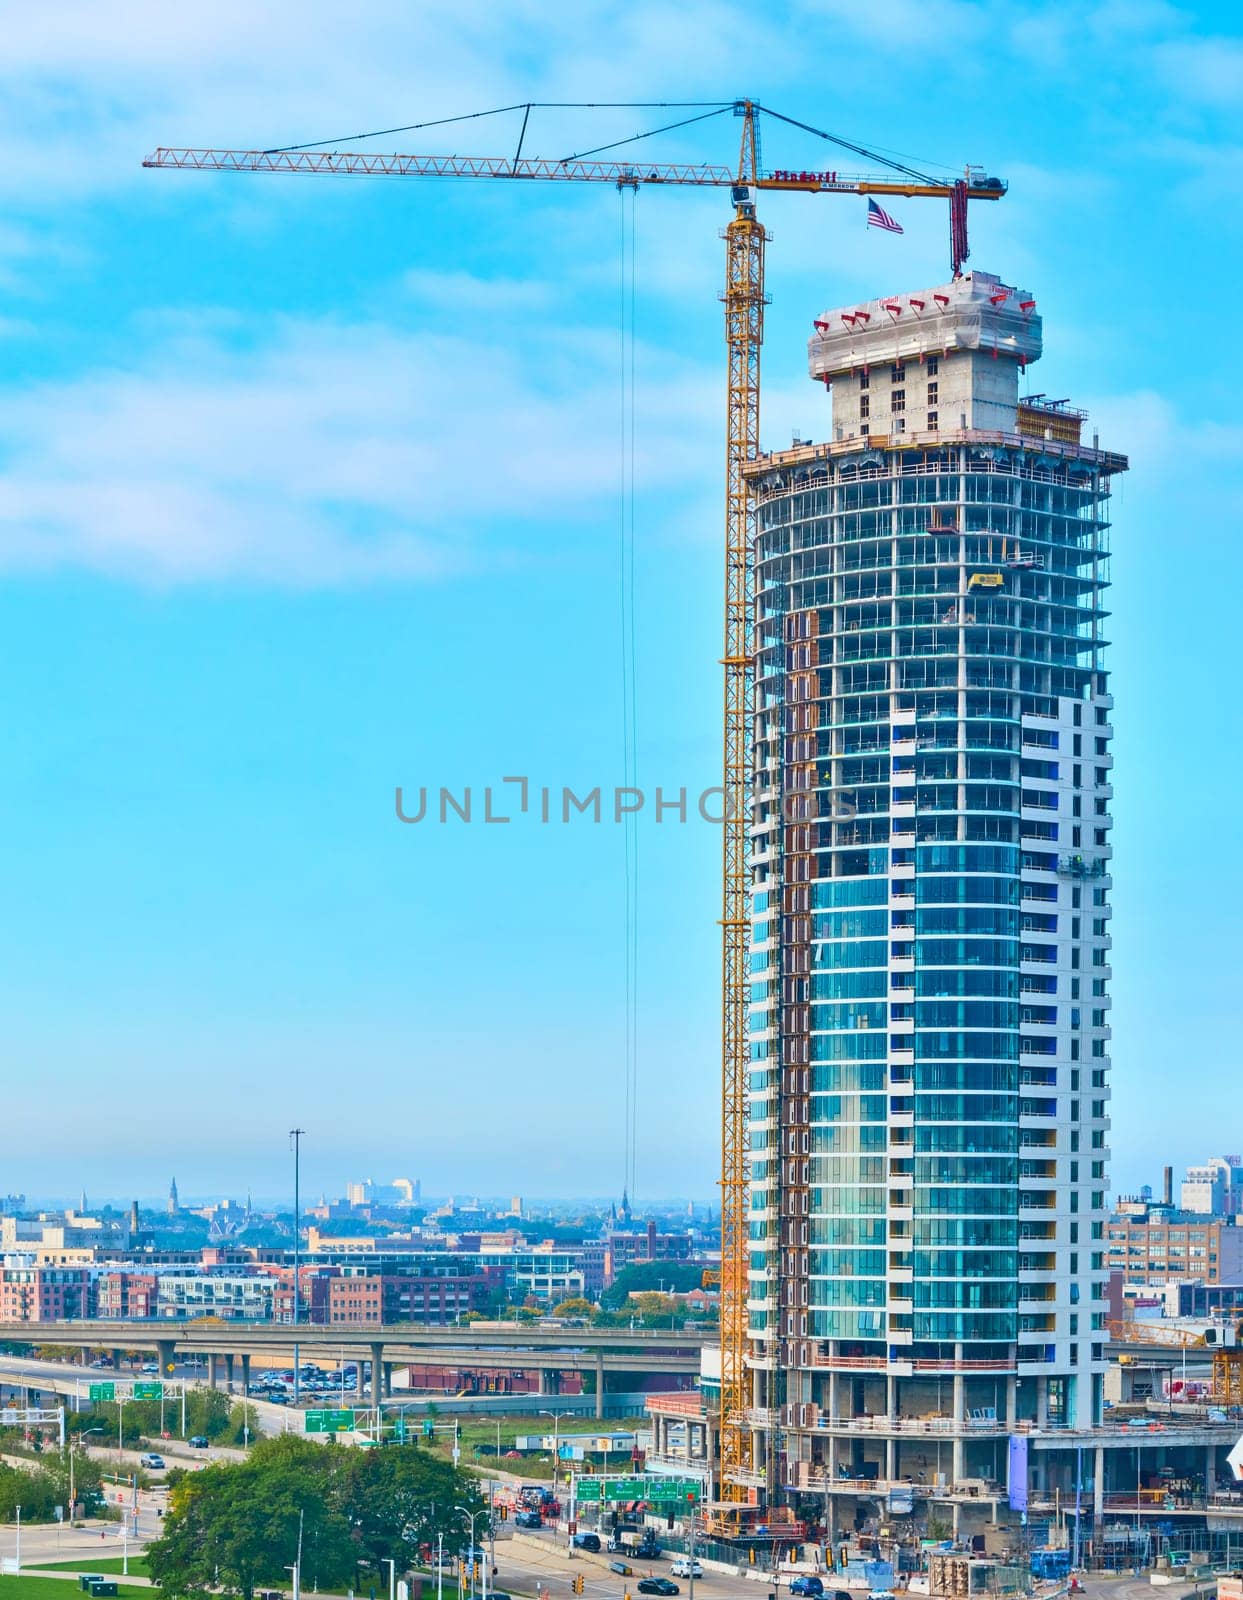 Aerial View of Skyscraper Construction in Urban Milwaukee by njproductions